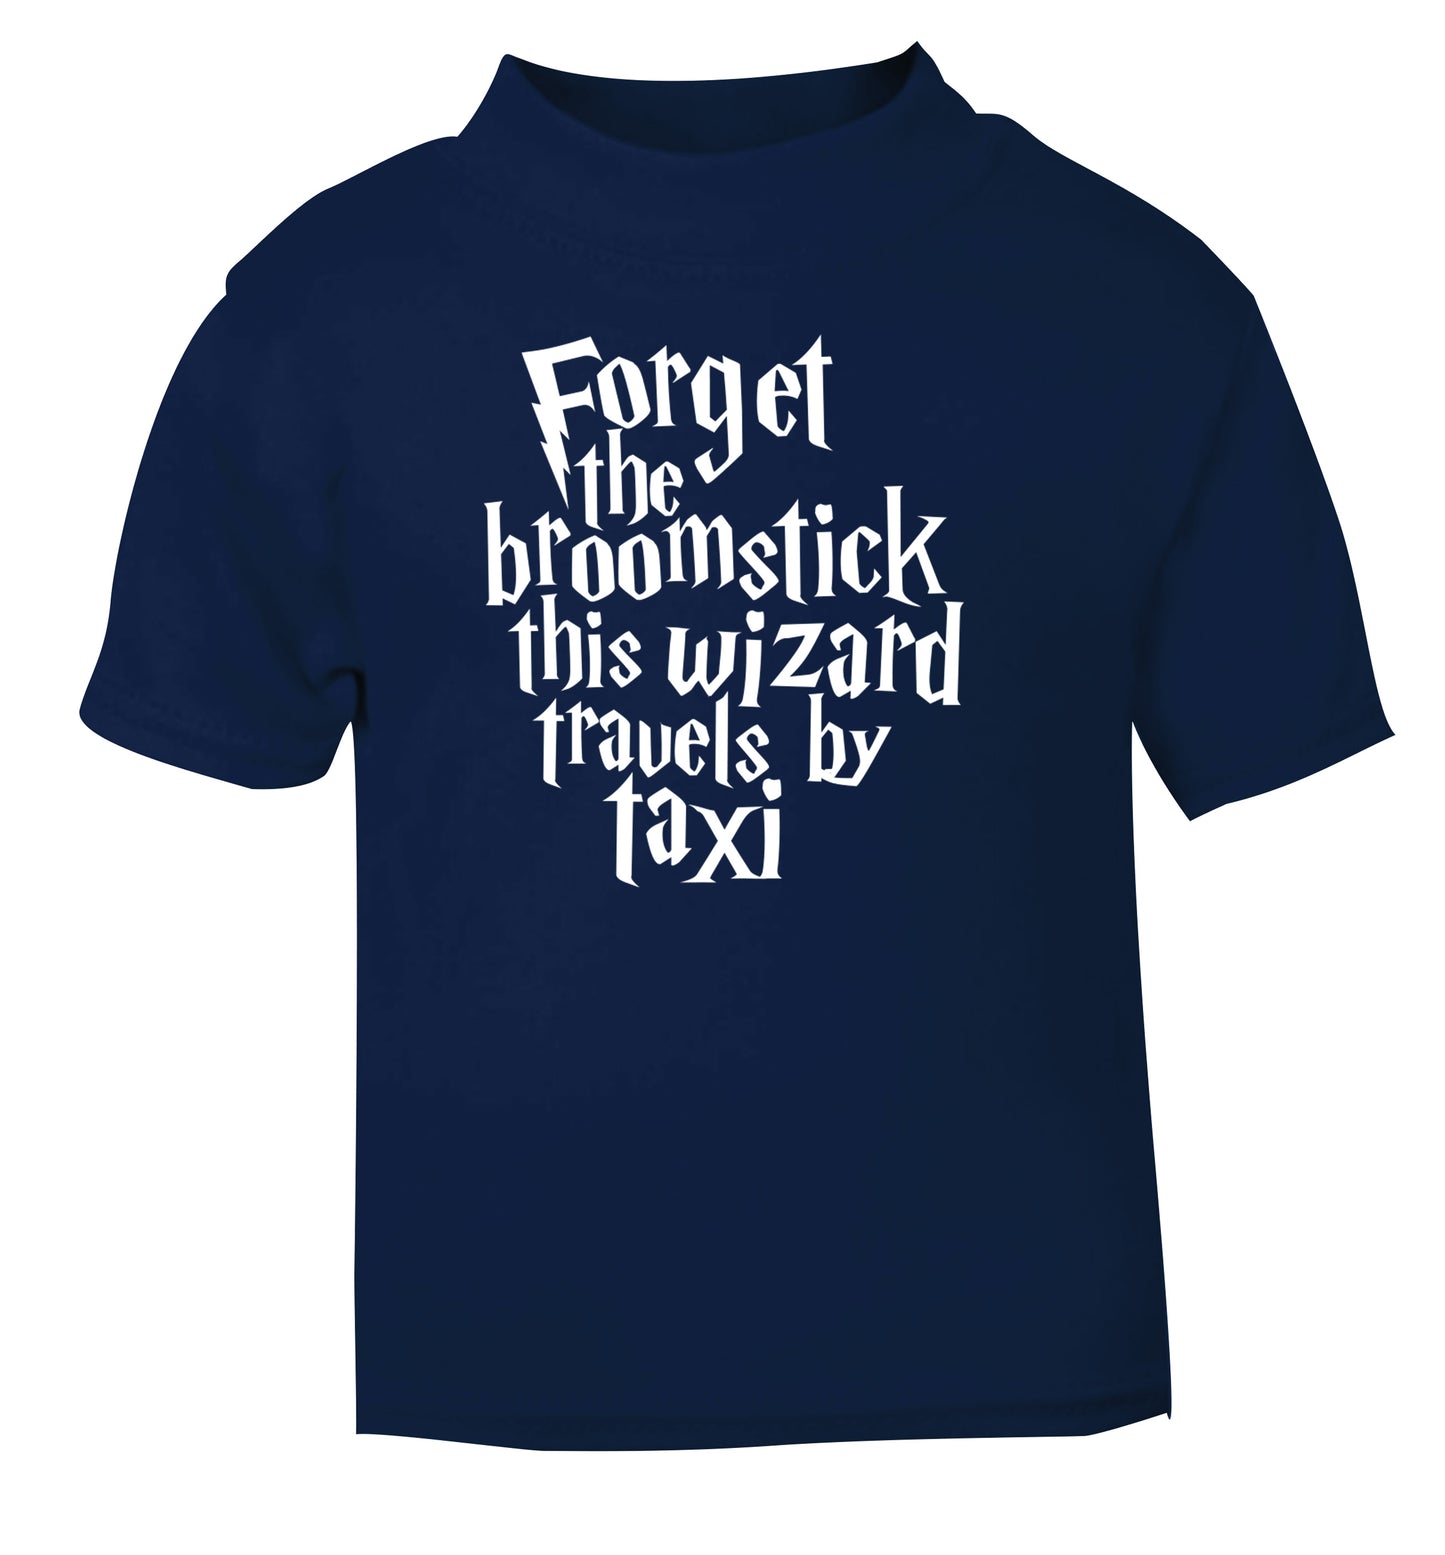 Forget the broomstick this wizard travels by taxi navy Baby Toddler Tshirt 2 Years